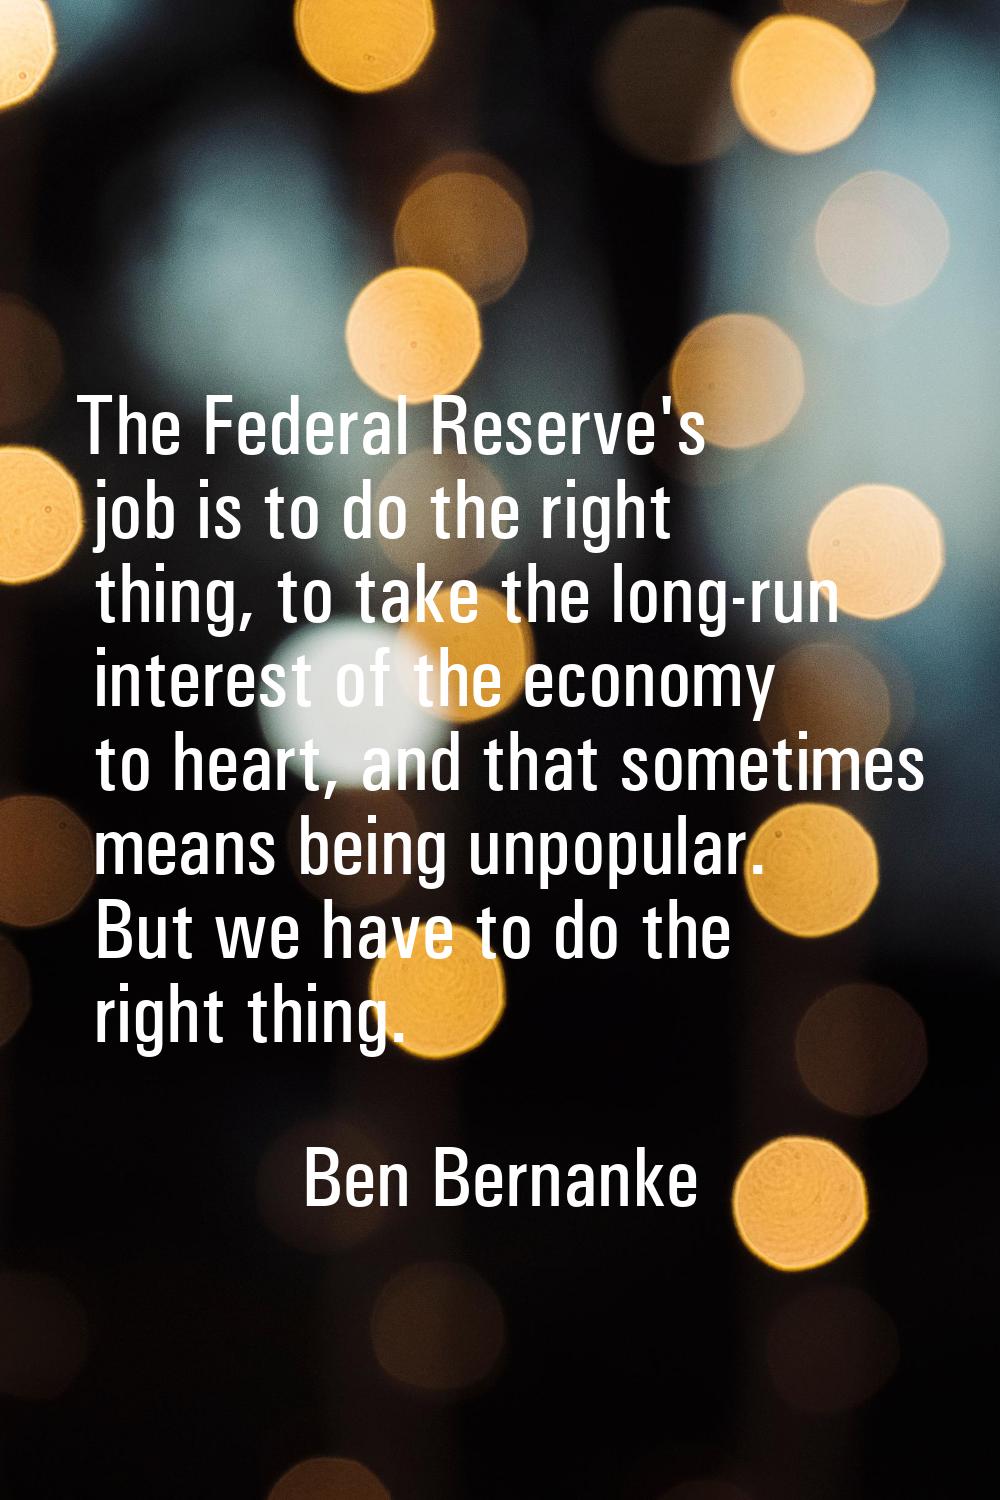 The Federal Reserve's job is to do the right thing, to take the long-run interest of the economy to